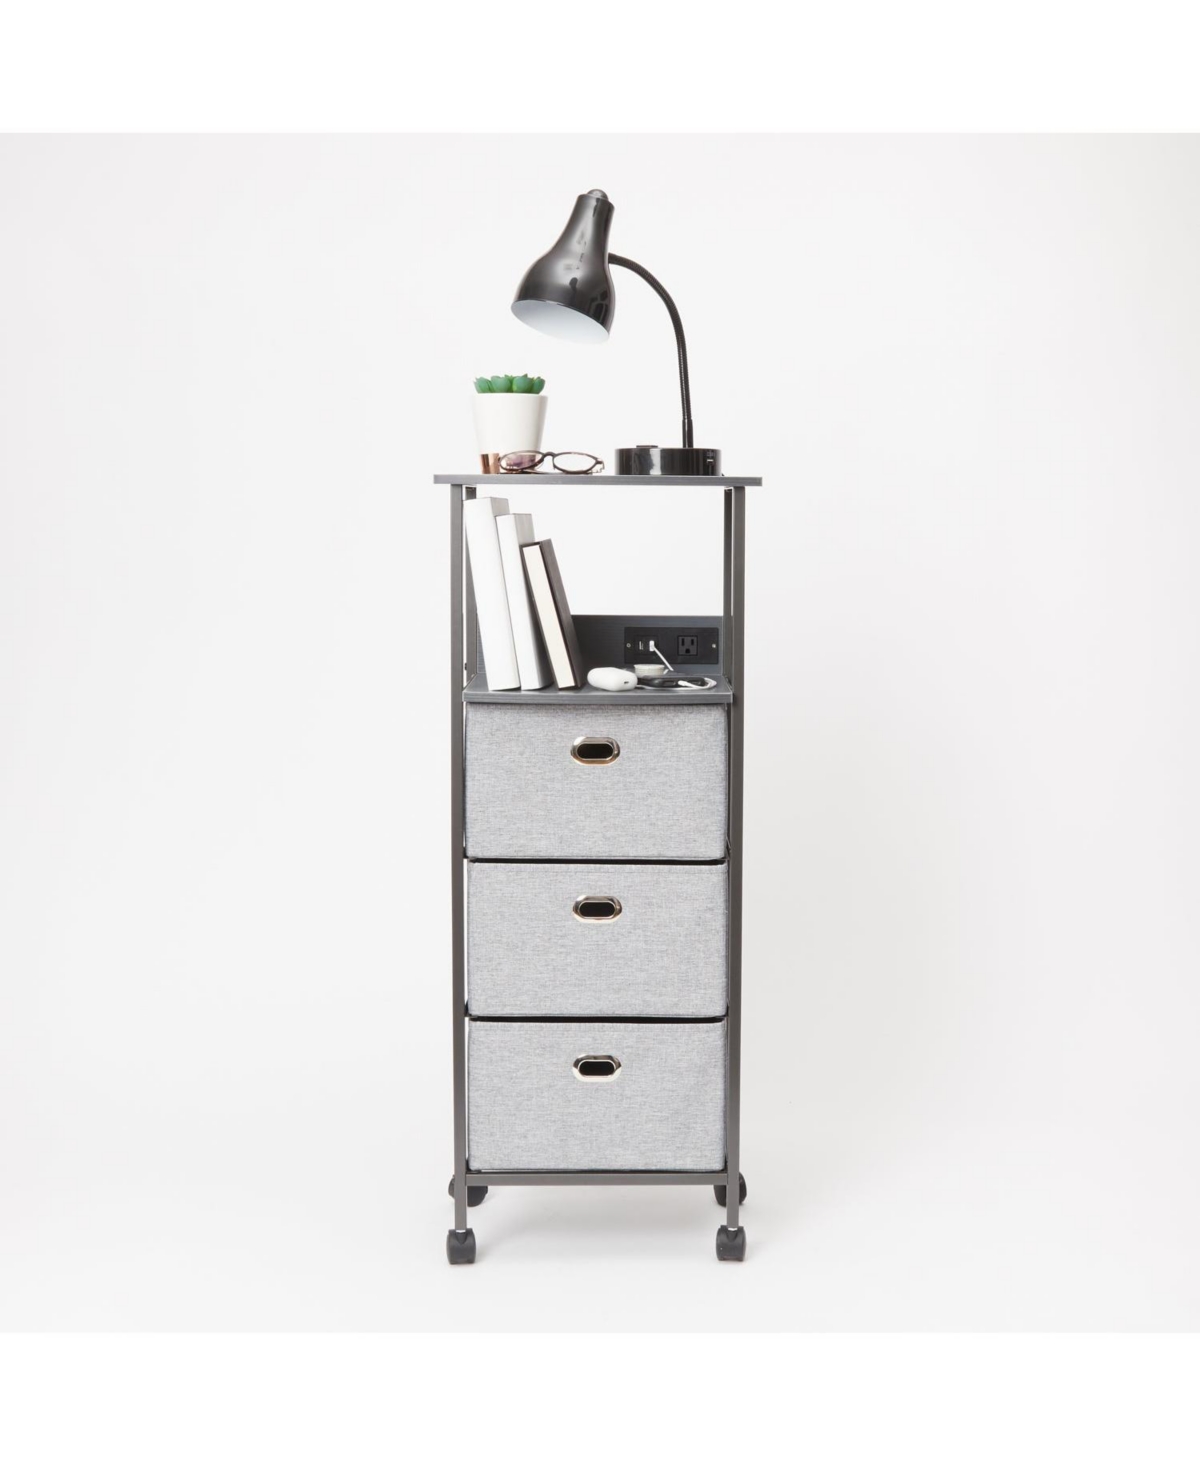 3-Drawer Charging Cart on Wheels, Features 2 Usb Ports and 1 Outlet - Grommeted White